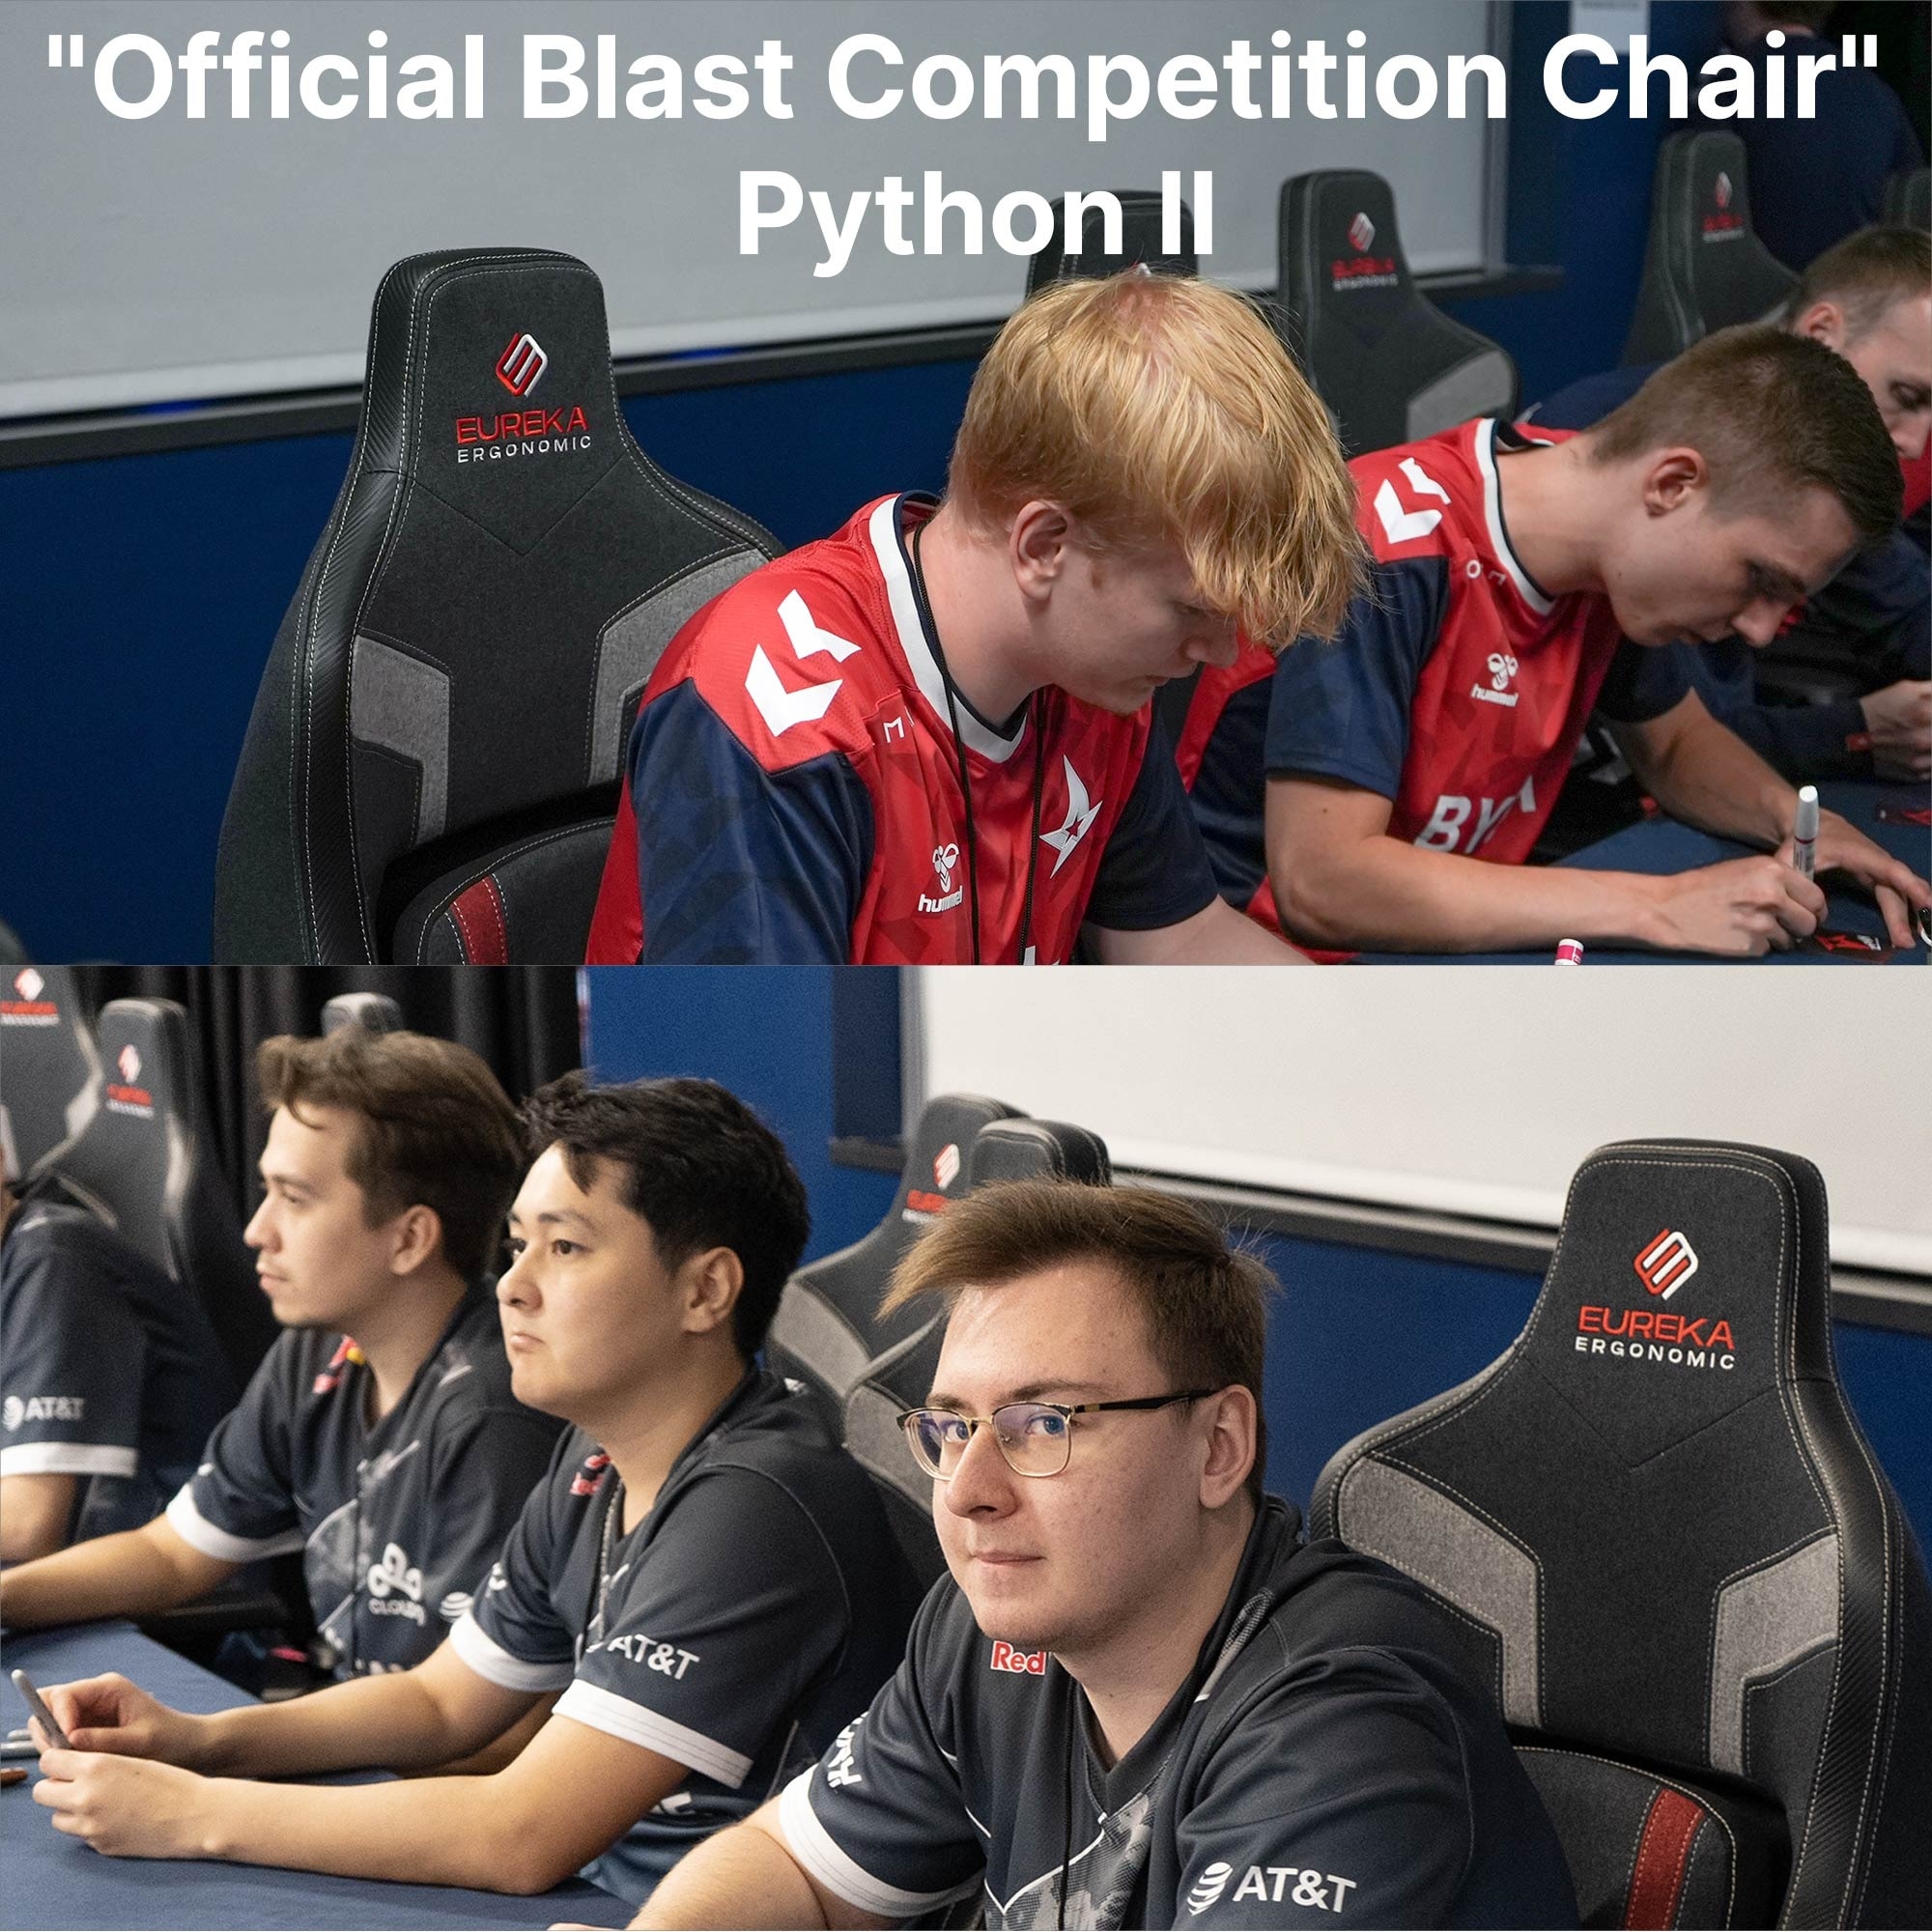 https://ak1.ostkcdn.com/images/products/is/images/direct/97af7d4a5ed67f660c900dca3a82ae1178113839/%22Official-Blast-Competition-Chair%22-Python-II%2C-Ergonomic-Chair.jpg